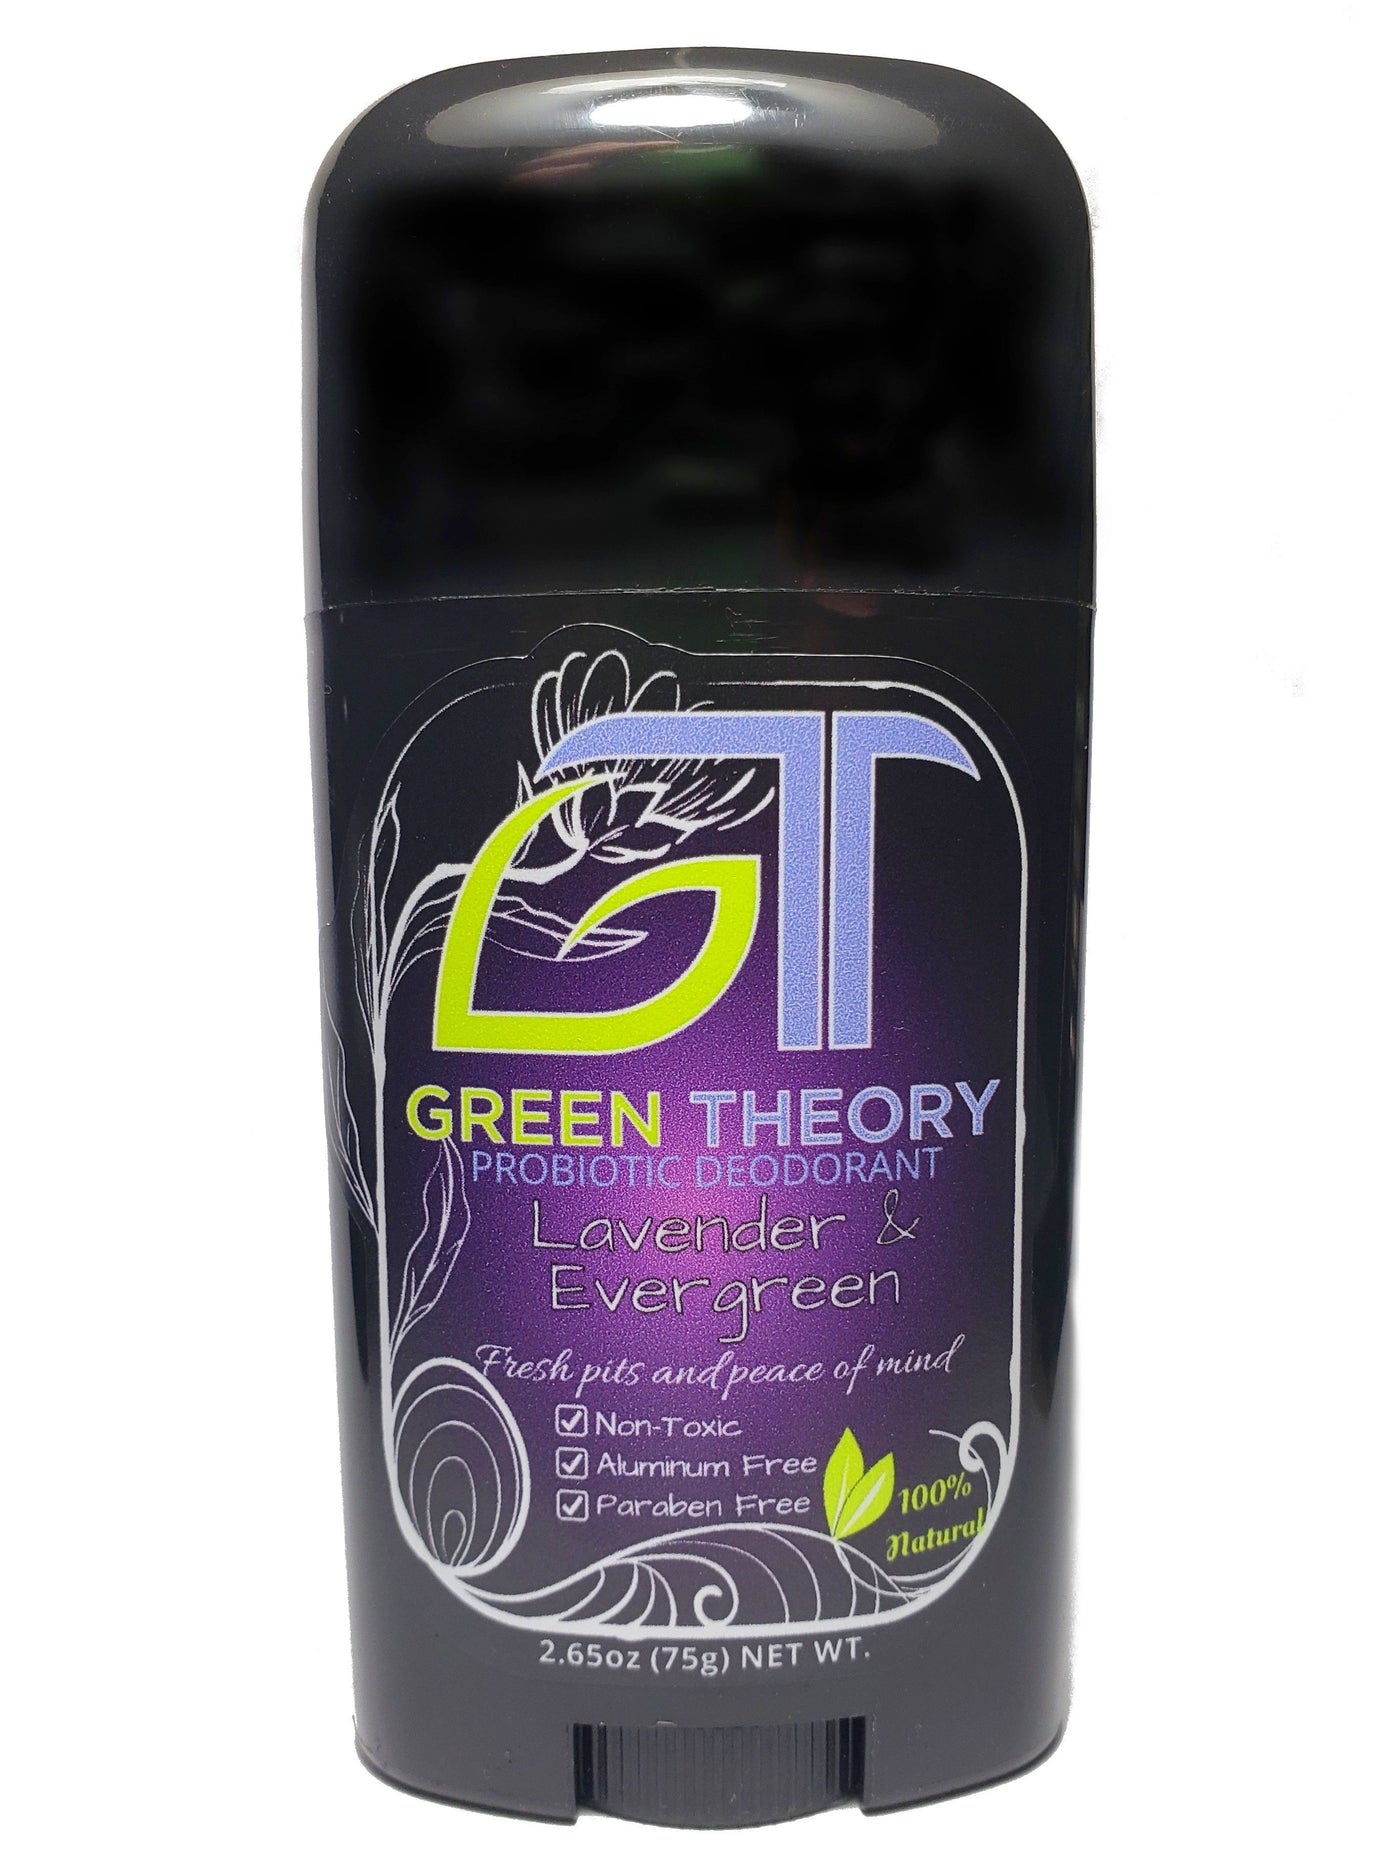 photo of the front of Green Theory lavender & evergreen probiotic deodorant against a white background